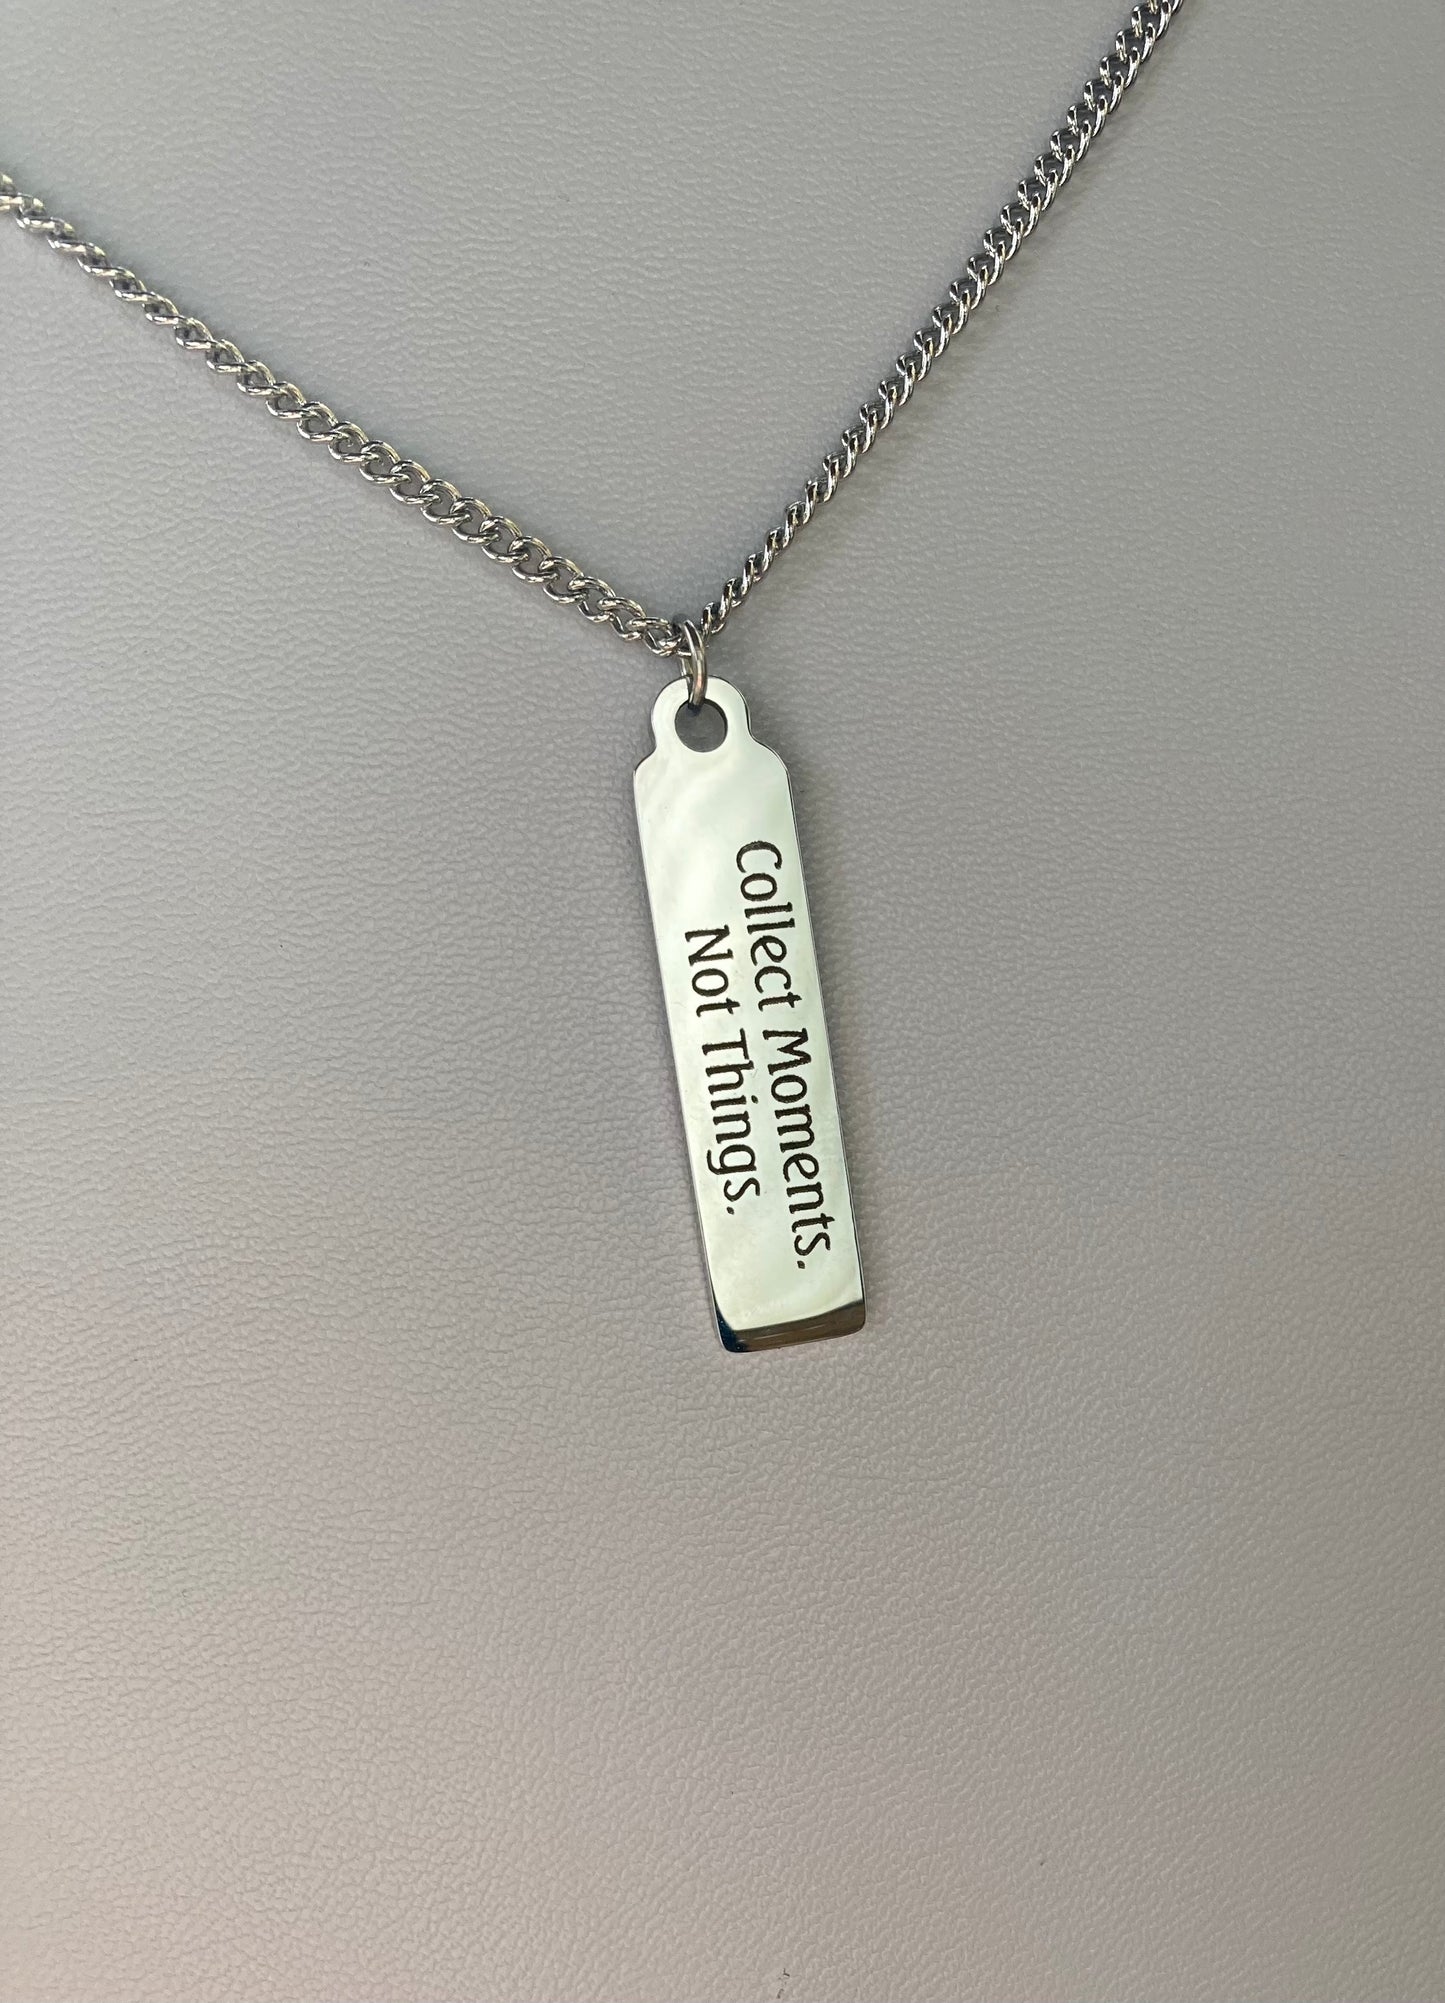 Collect Moments Necklace